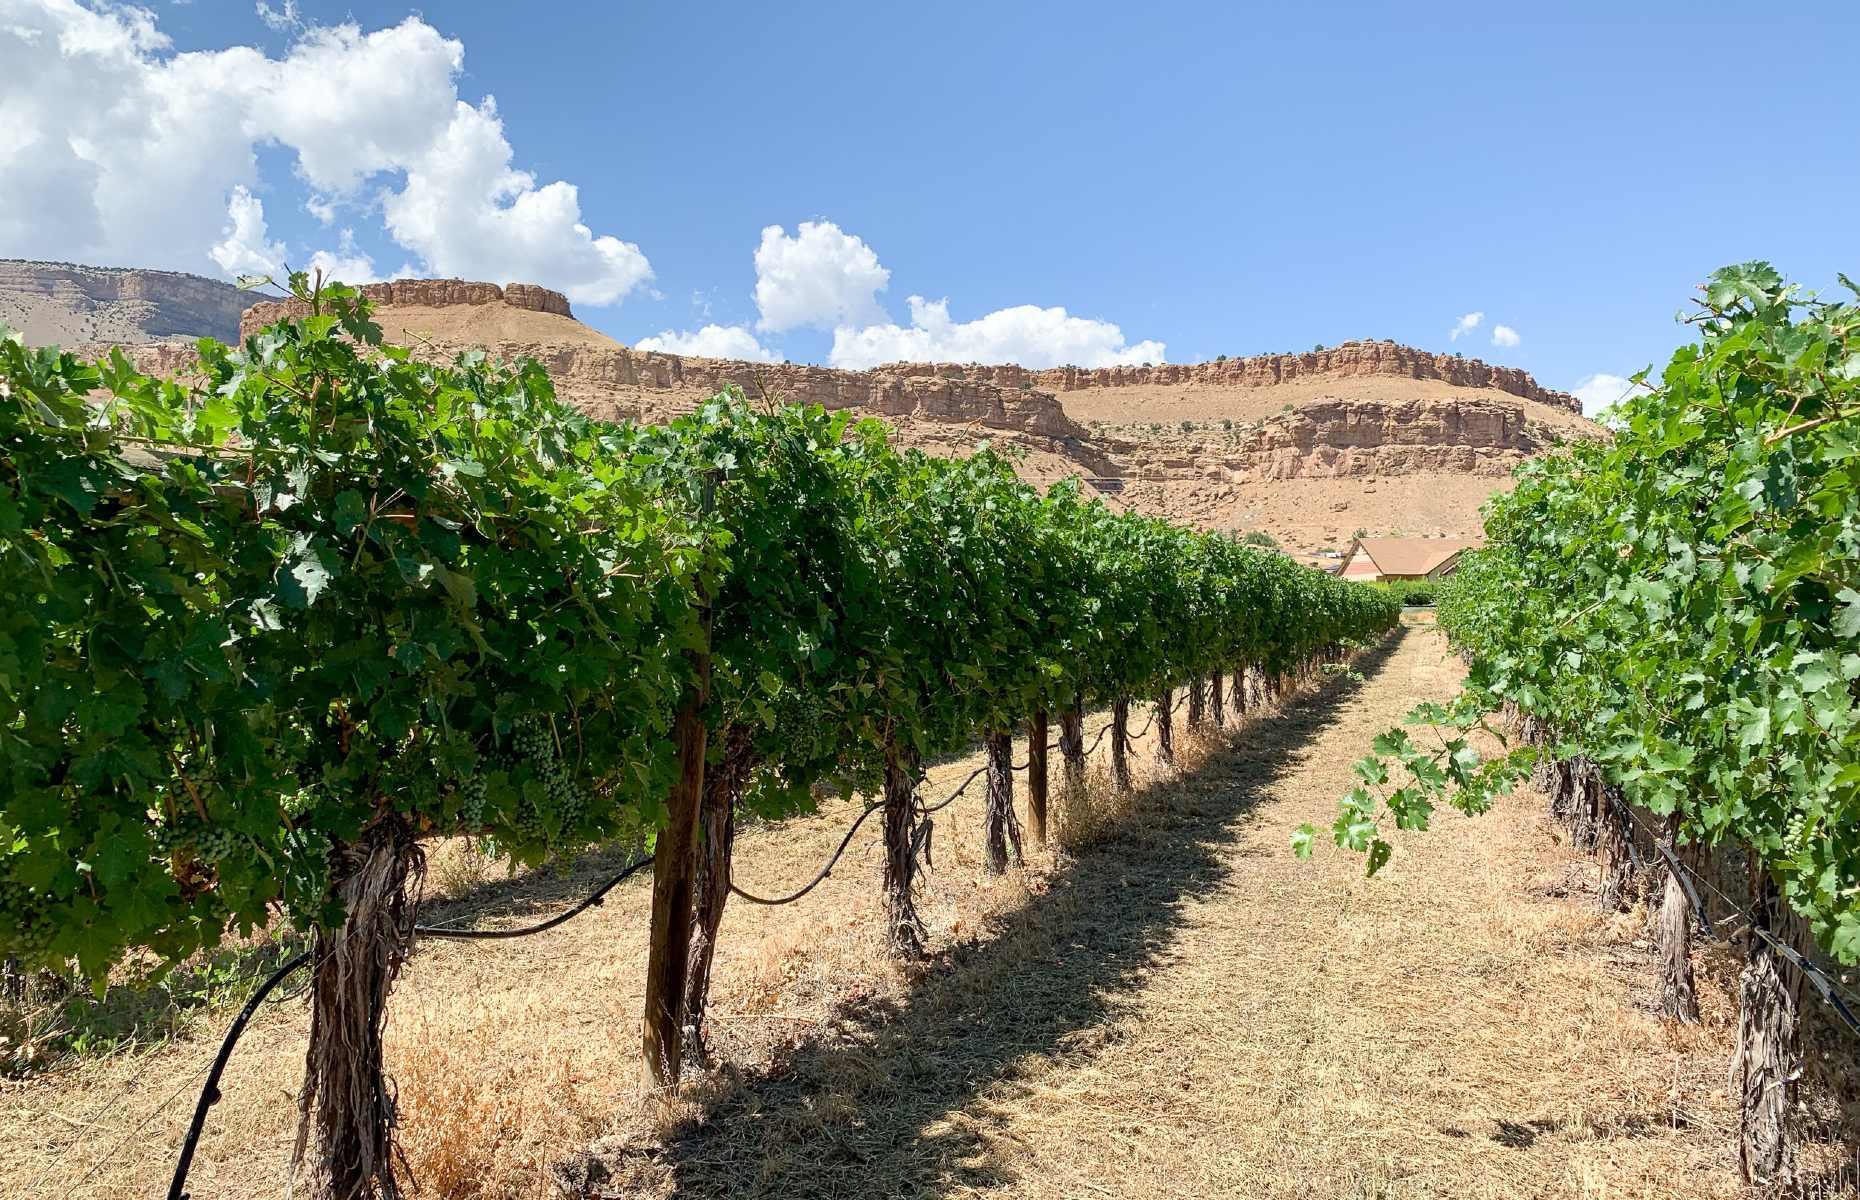 <p>We can’t think of many wine-growing locations that are more beautiful than Colorado’s Grand Valley. Occupying an especially panoramic spot within this region is <a href="https://www.colterris.com/">Colterris Winery</a>, a proudly Coloradan business which produces 100% estate-grown bottles. Try a seated tasting for $25 a head, where you’ll get to sample seven wines, or opt for something a little different by booking a horseback ride and private tasting, which will allow you to ride through the gorgeous vineyards before sampling produce in a stunning courtyard. </p>